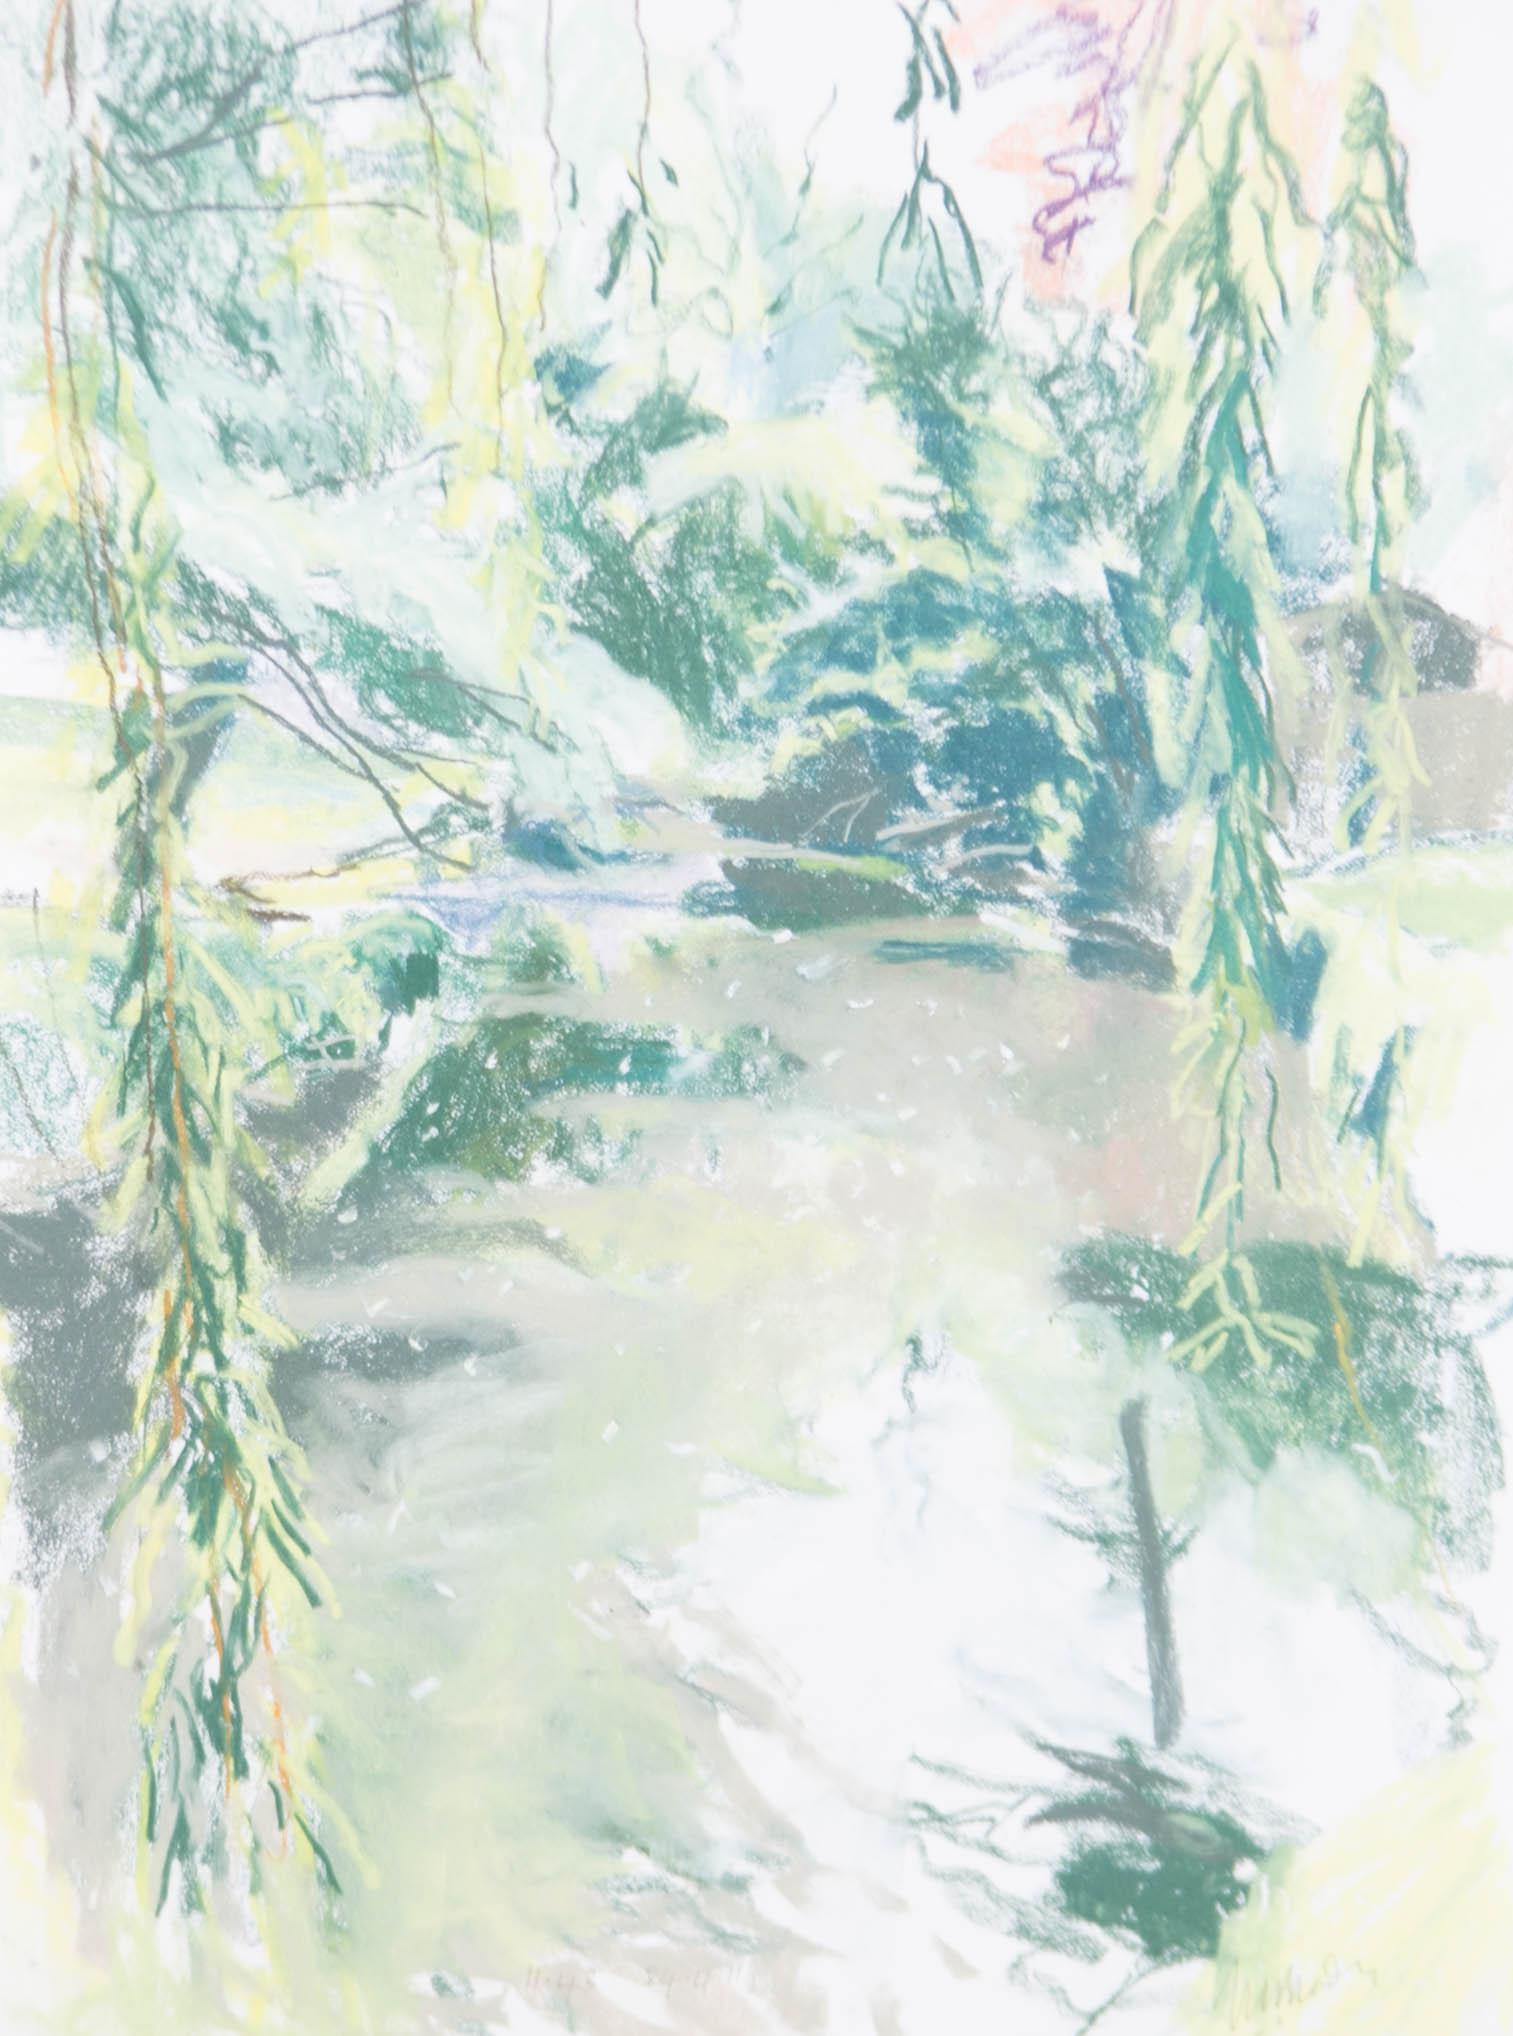 From his extensive series based upon Seacourt Stream, this artwork boasts impulsive, impressionistic mark-making and a fragrant lime palette to depict a willow over the river.

Signed, dated and inscribed.

Well presented in a glazed and whitewashed